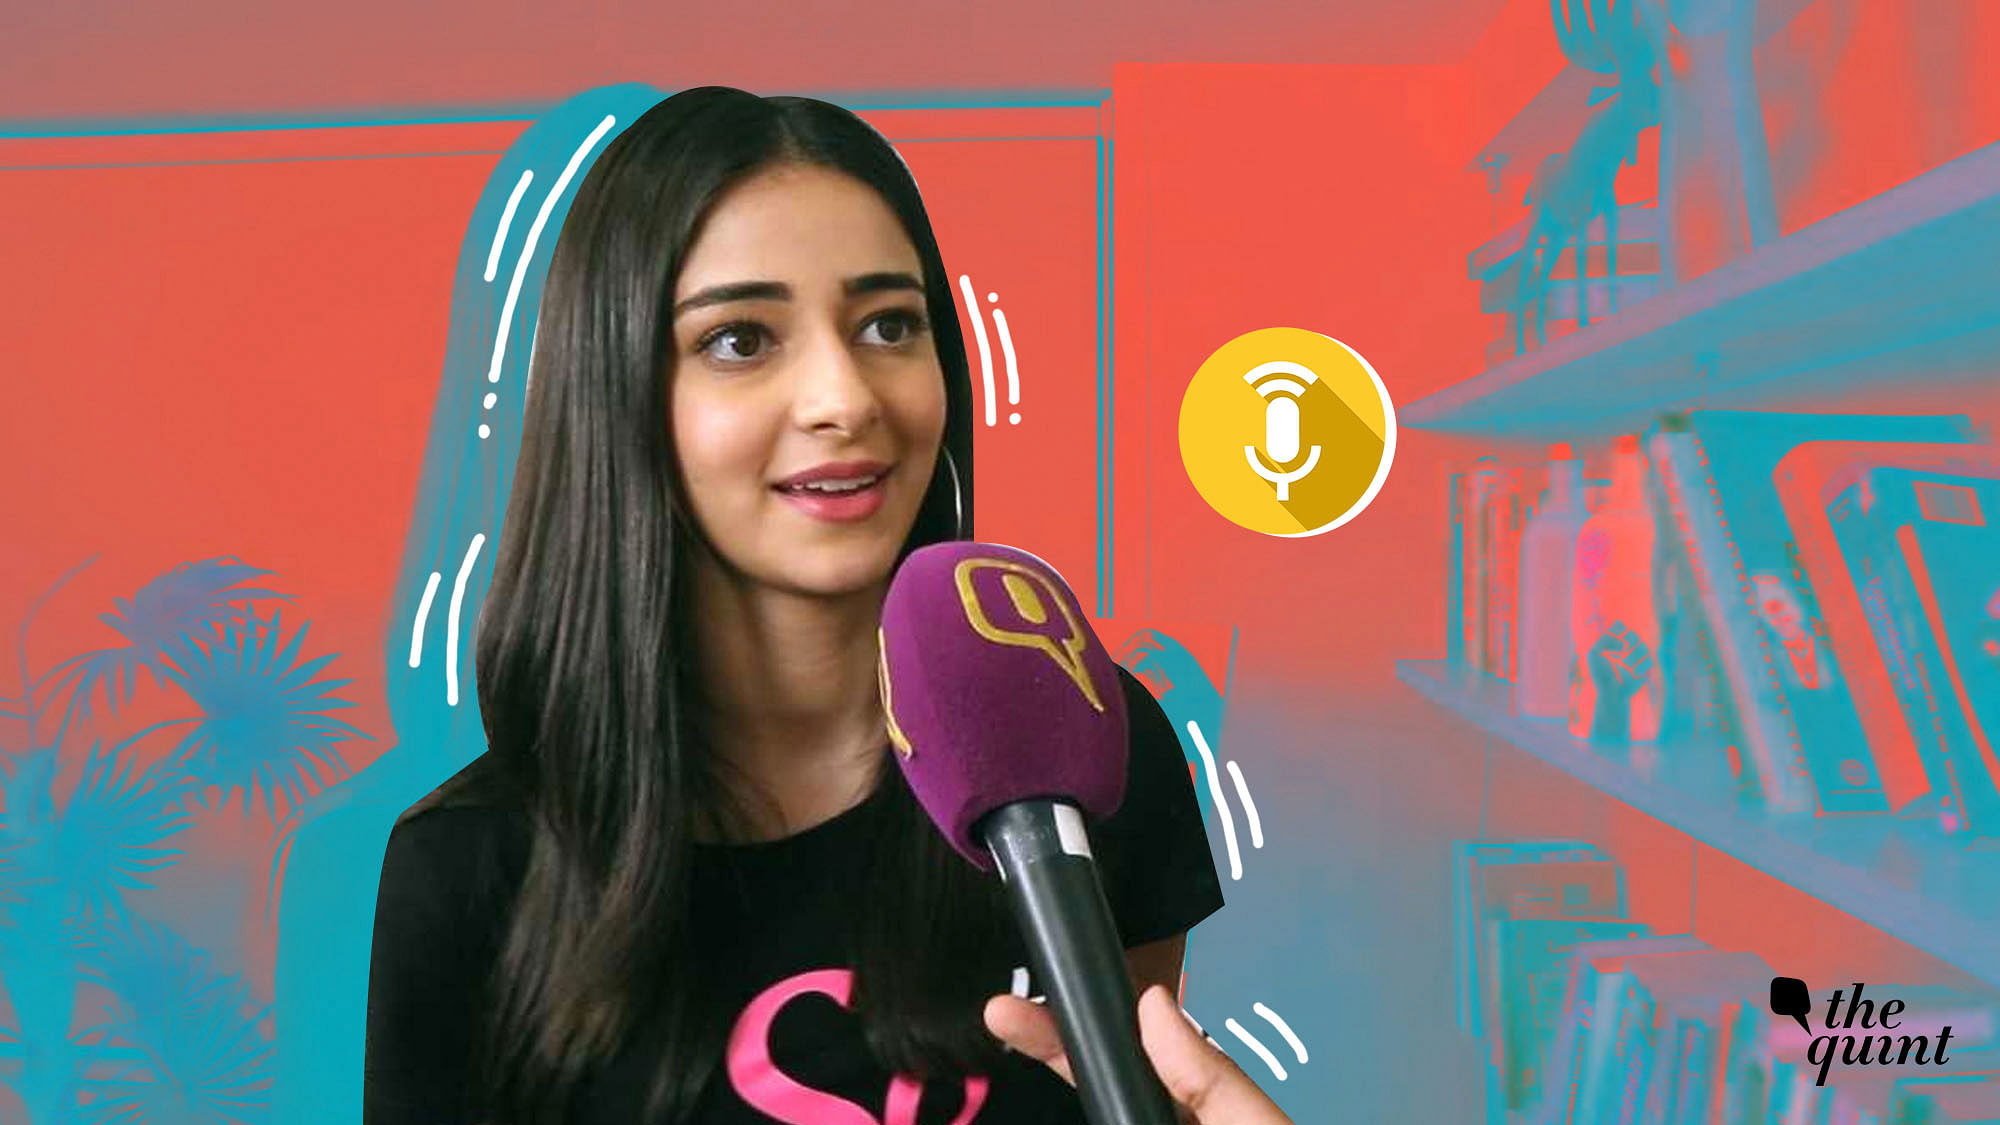 Ananya Panday has launched a campaign against cyber bullying.